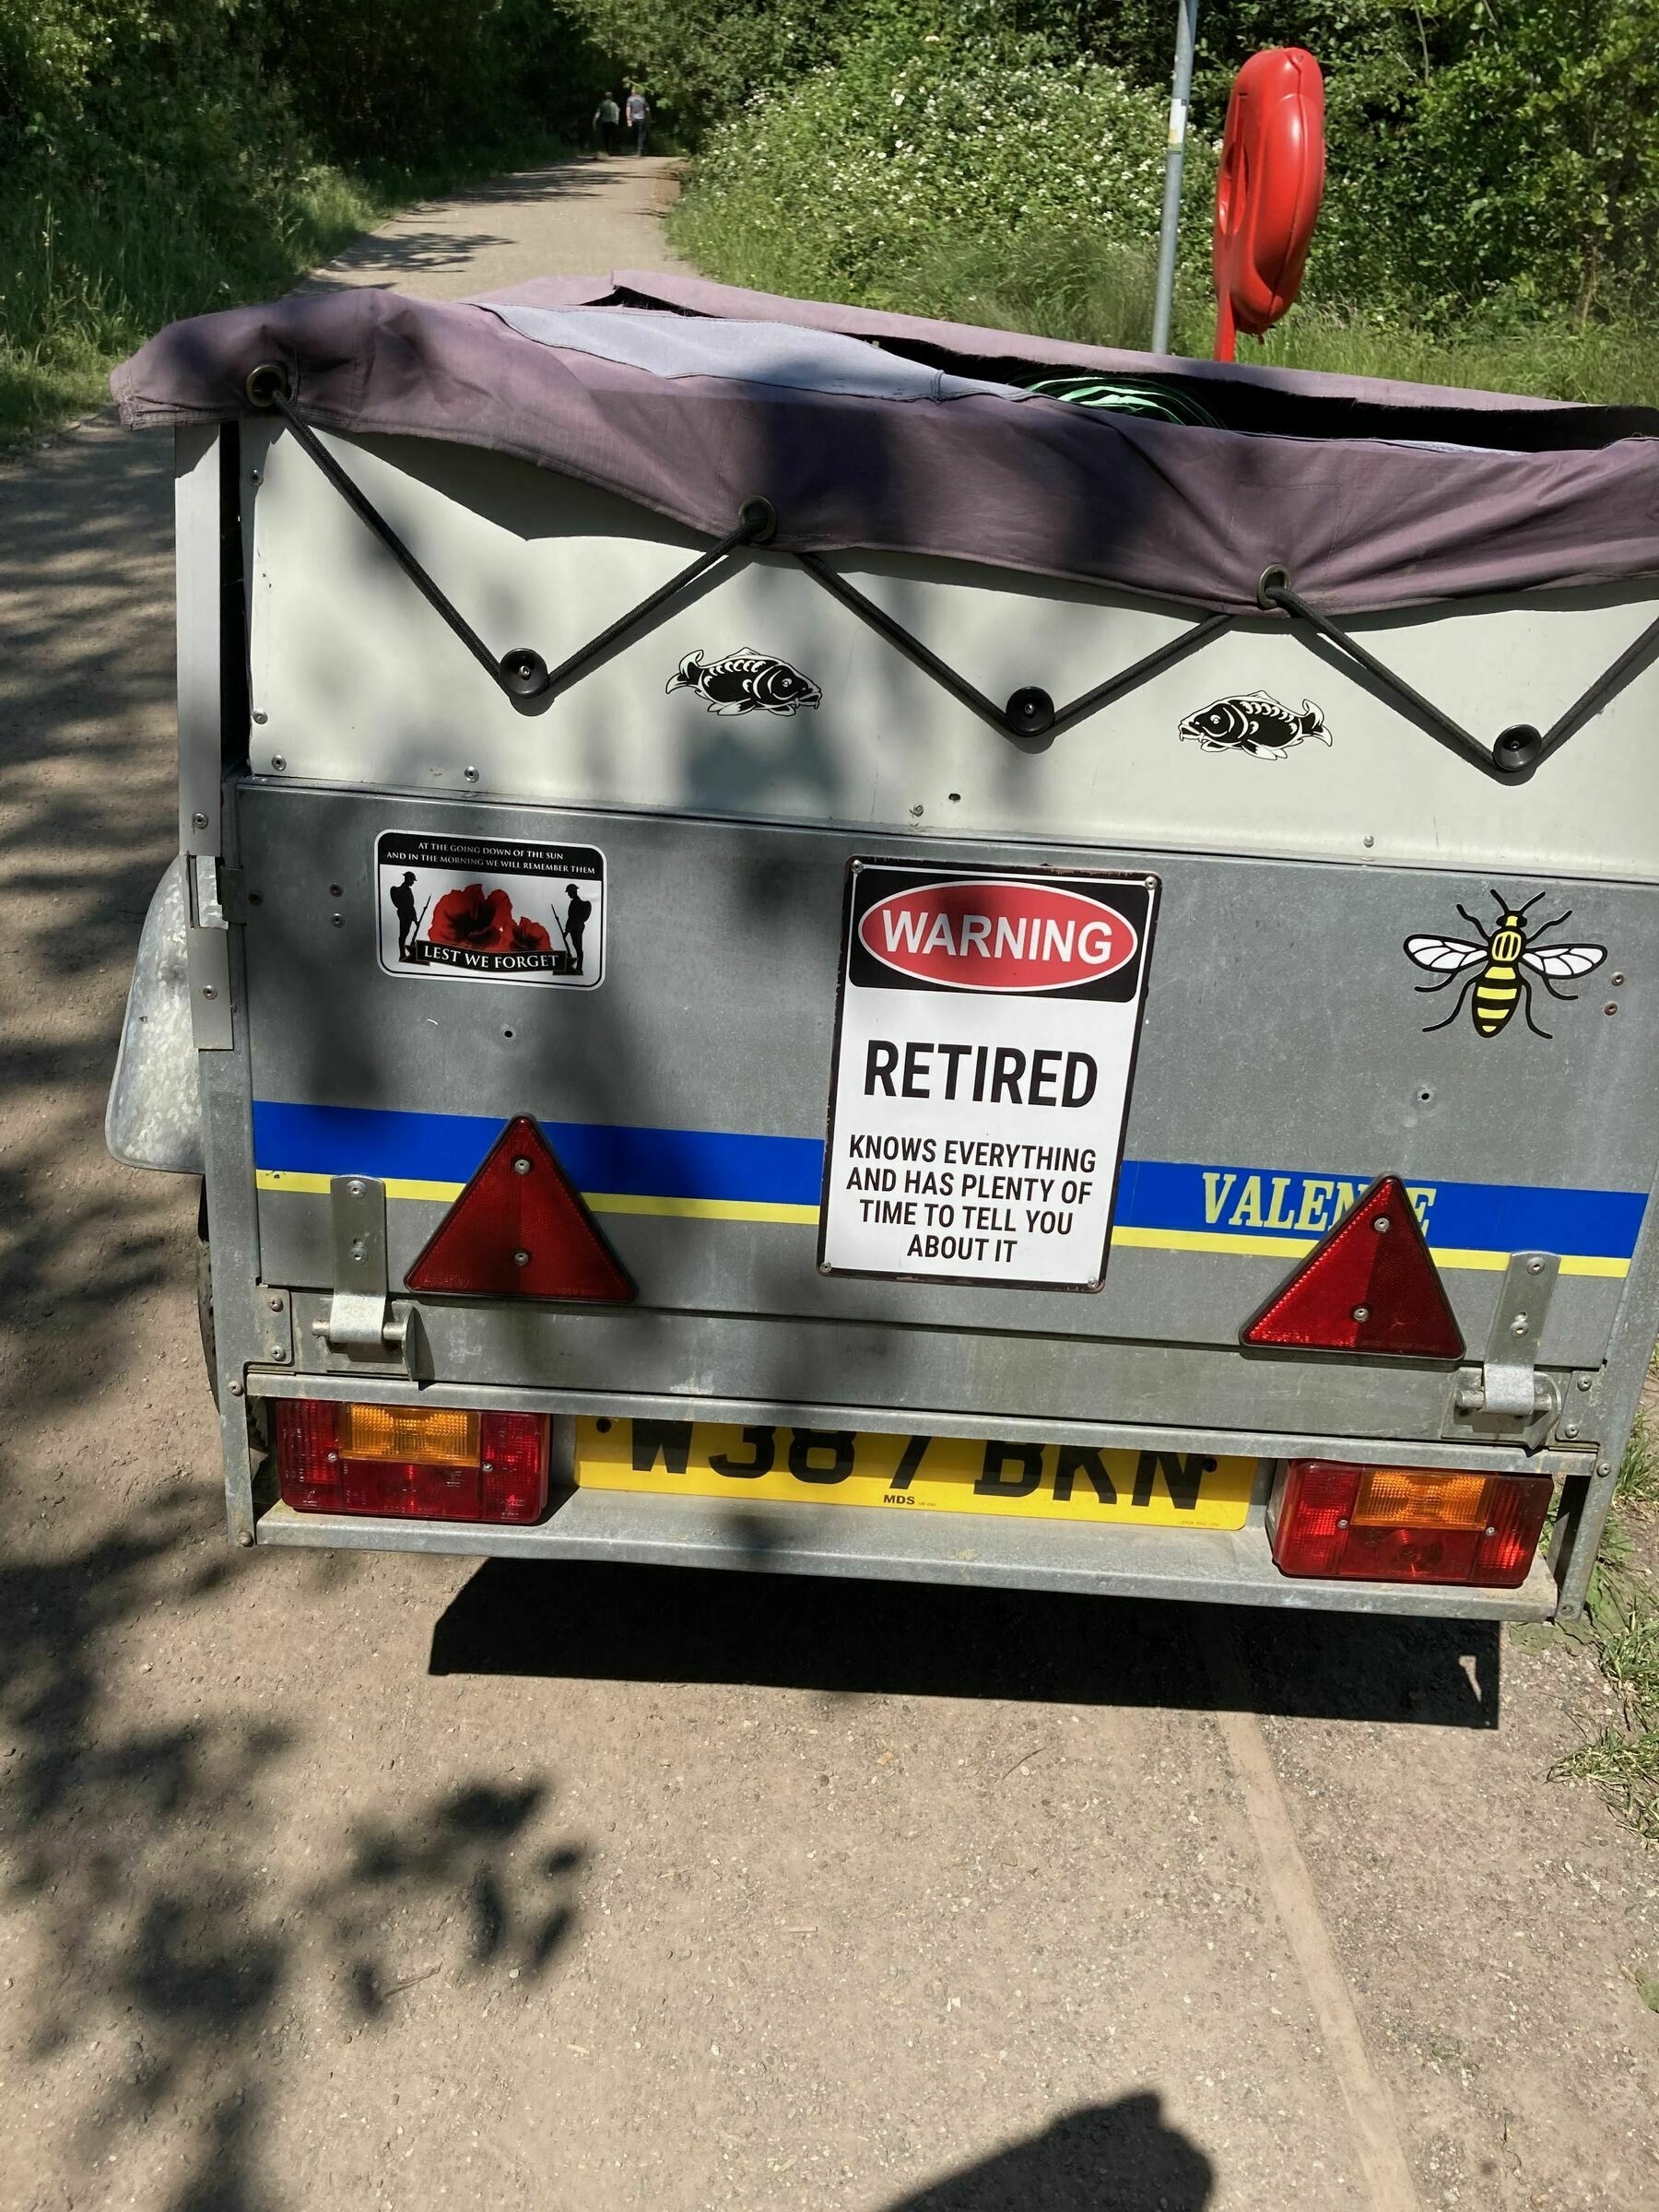  a large trailer containg fishing equipment beneath the covers.  On the back a large sign which reads "Warning. Retired.  Knows everything and has plenty of time to tell you about it."   